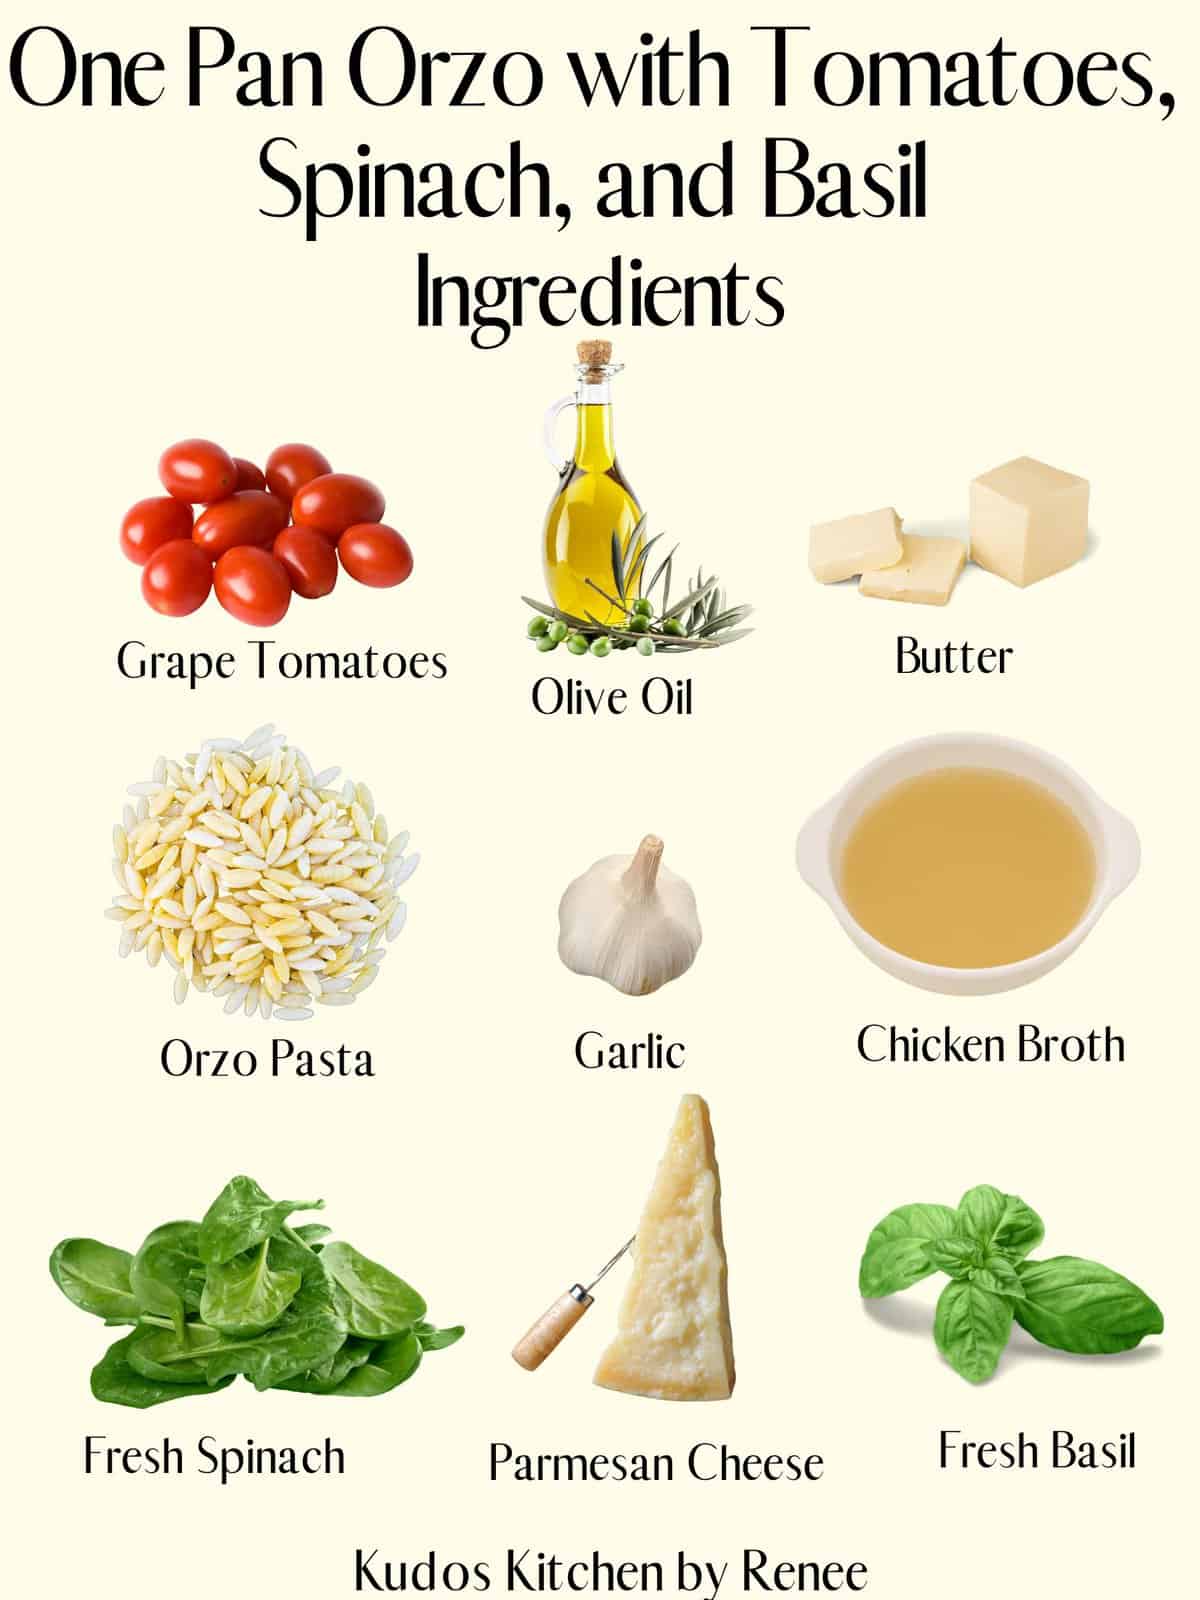 A visual list of ingredients to make One Pan Orzo with Tomatoes, Spinach, and Basil.